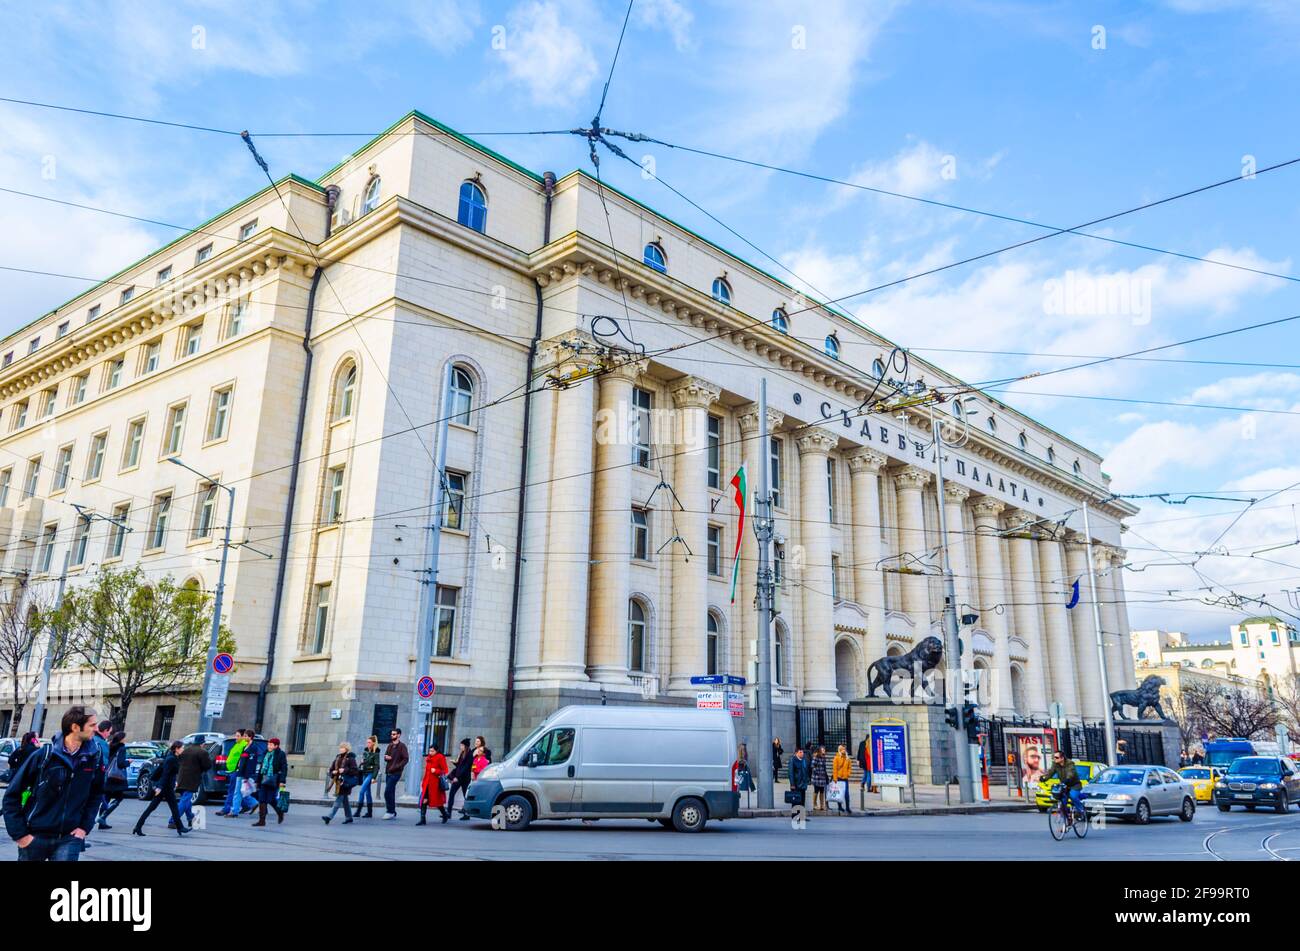 SOFIA, BULGARIA, NOVEMBER 17, 2014: People are strolling in front of the courthouse in Sofia, Bulgaria. Stock Photo